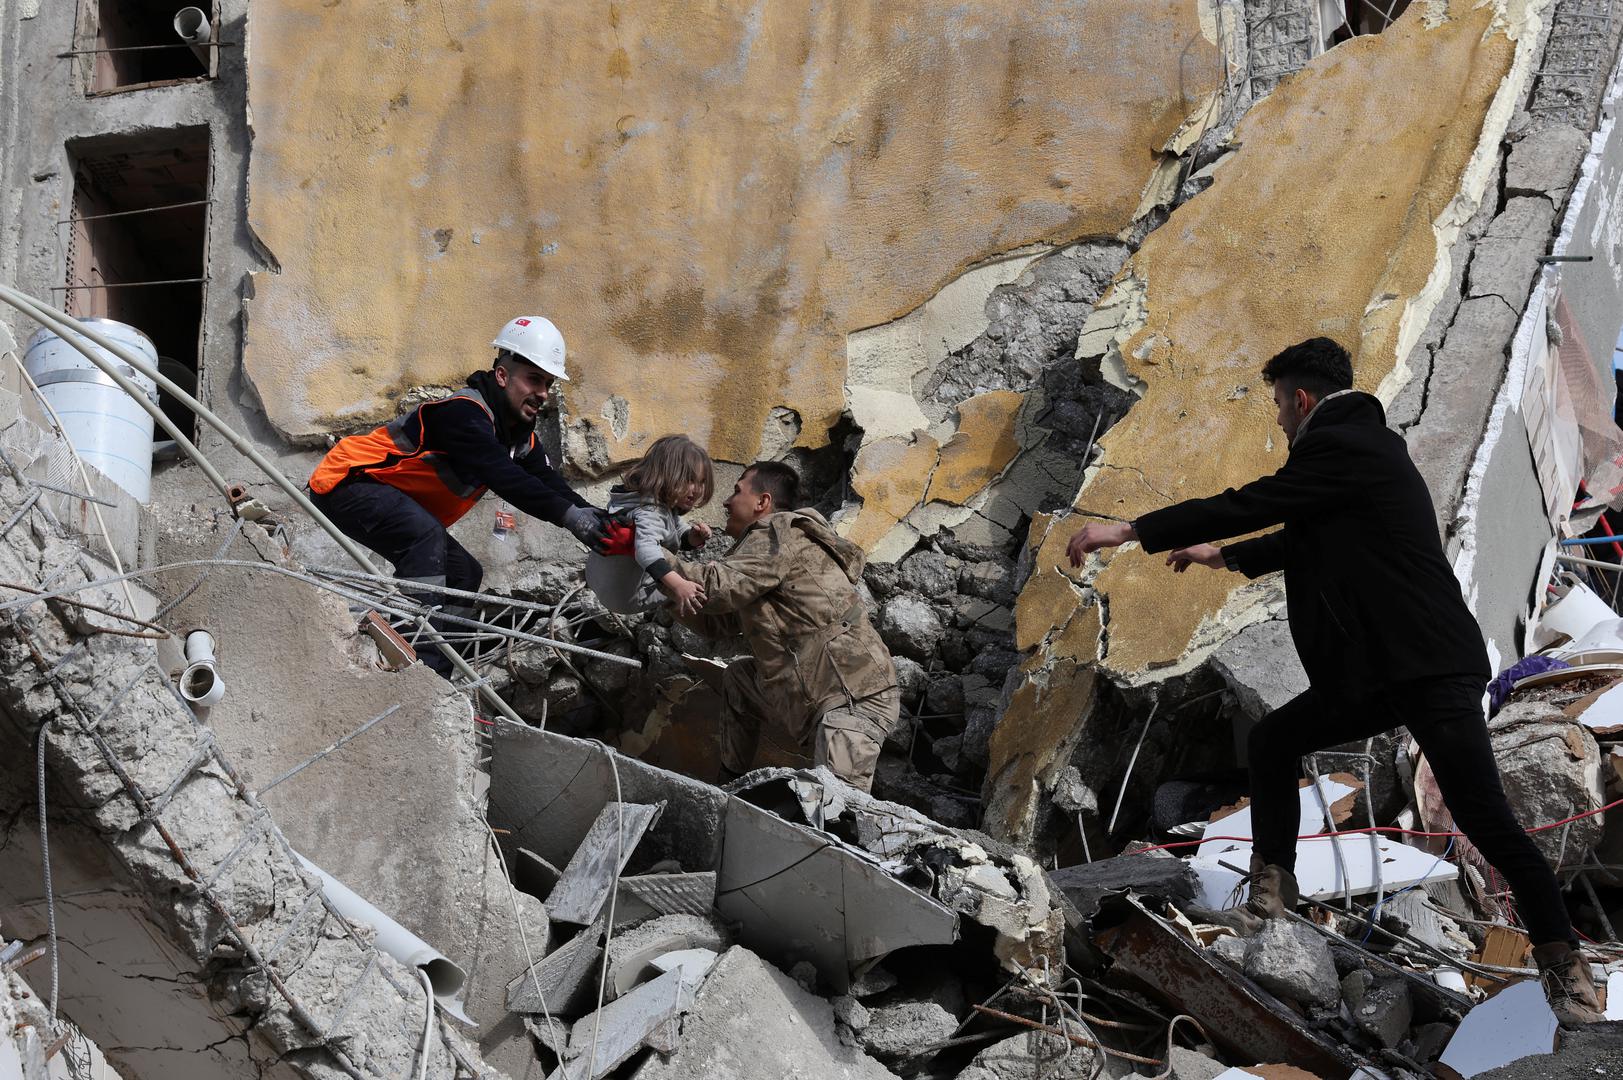 Muhammet Ruzgar, 5, is carried out by rescuers from the site of a damaged building, following an earthquake in Hatay, Turkey, February 7, 2023. REUTERS/Umit Bektas Photo: UMIT BEKTAS/REUTERS